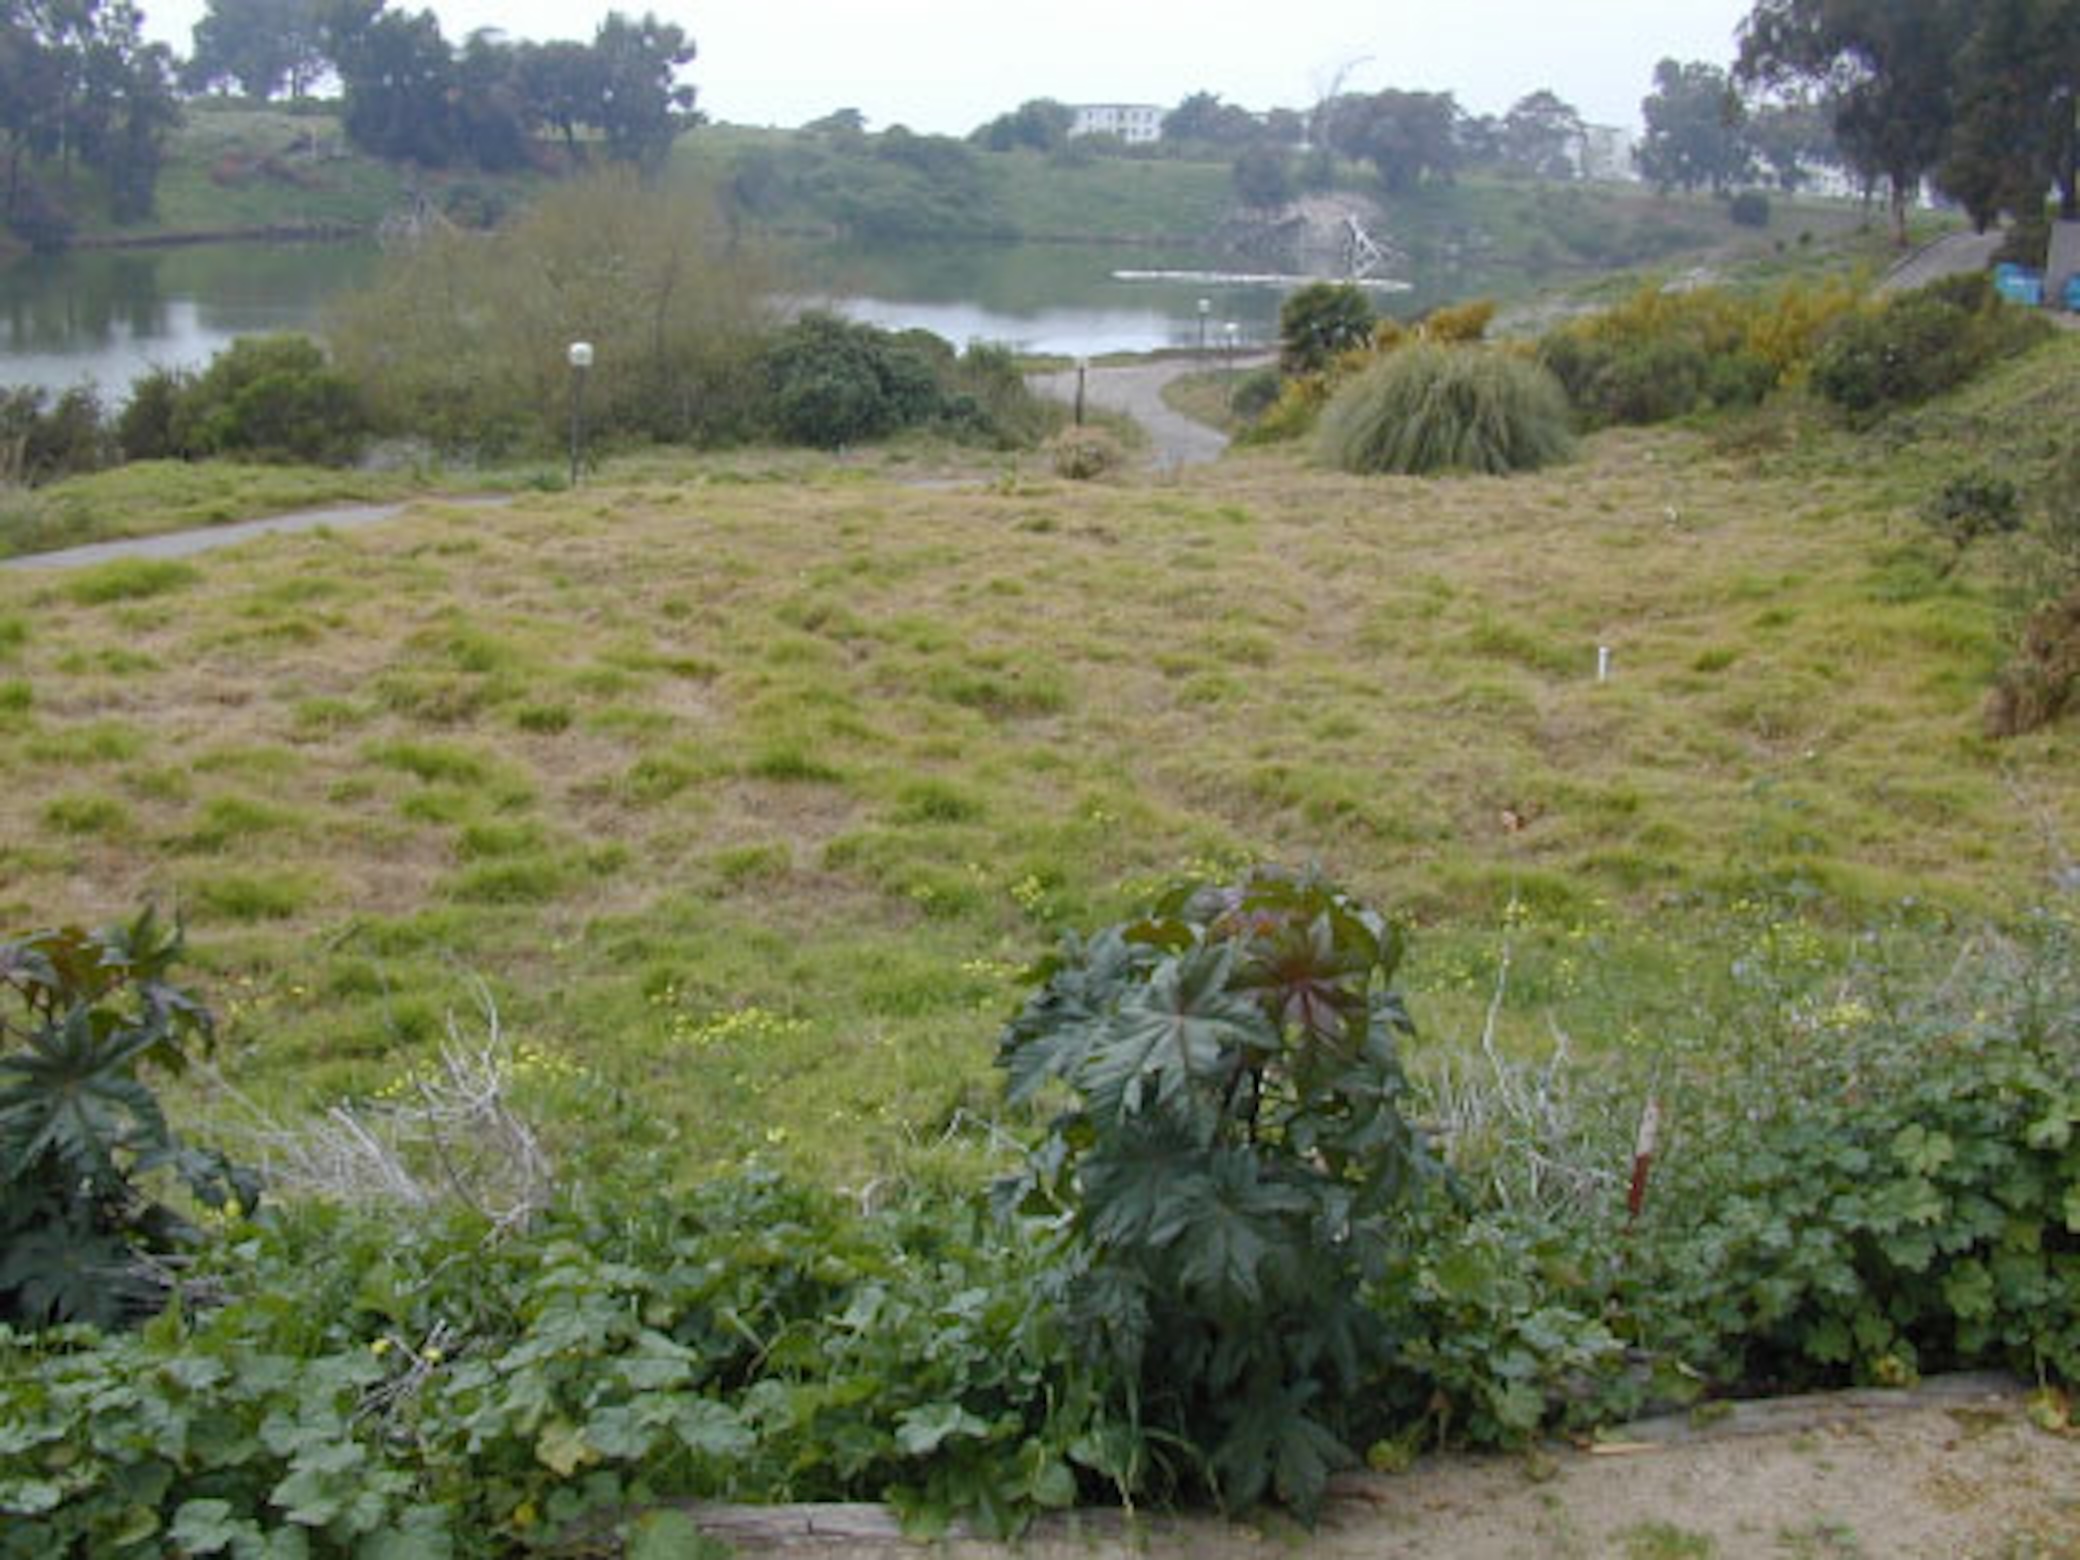 San Nicolas slope covered in iceplant